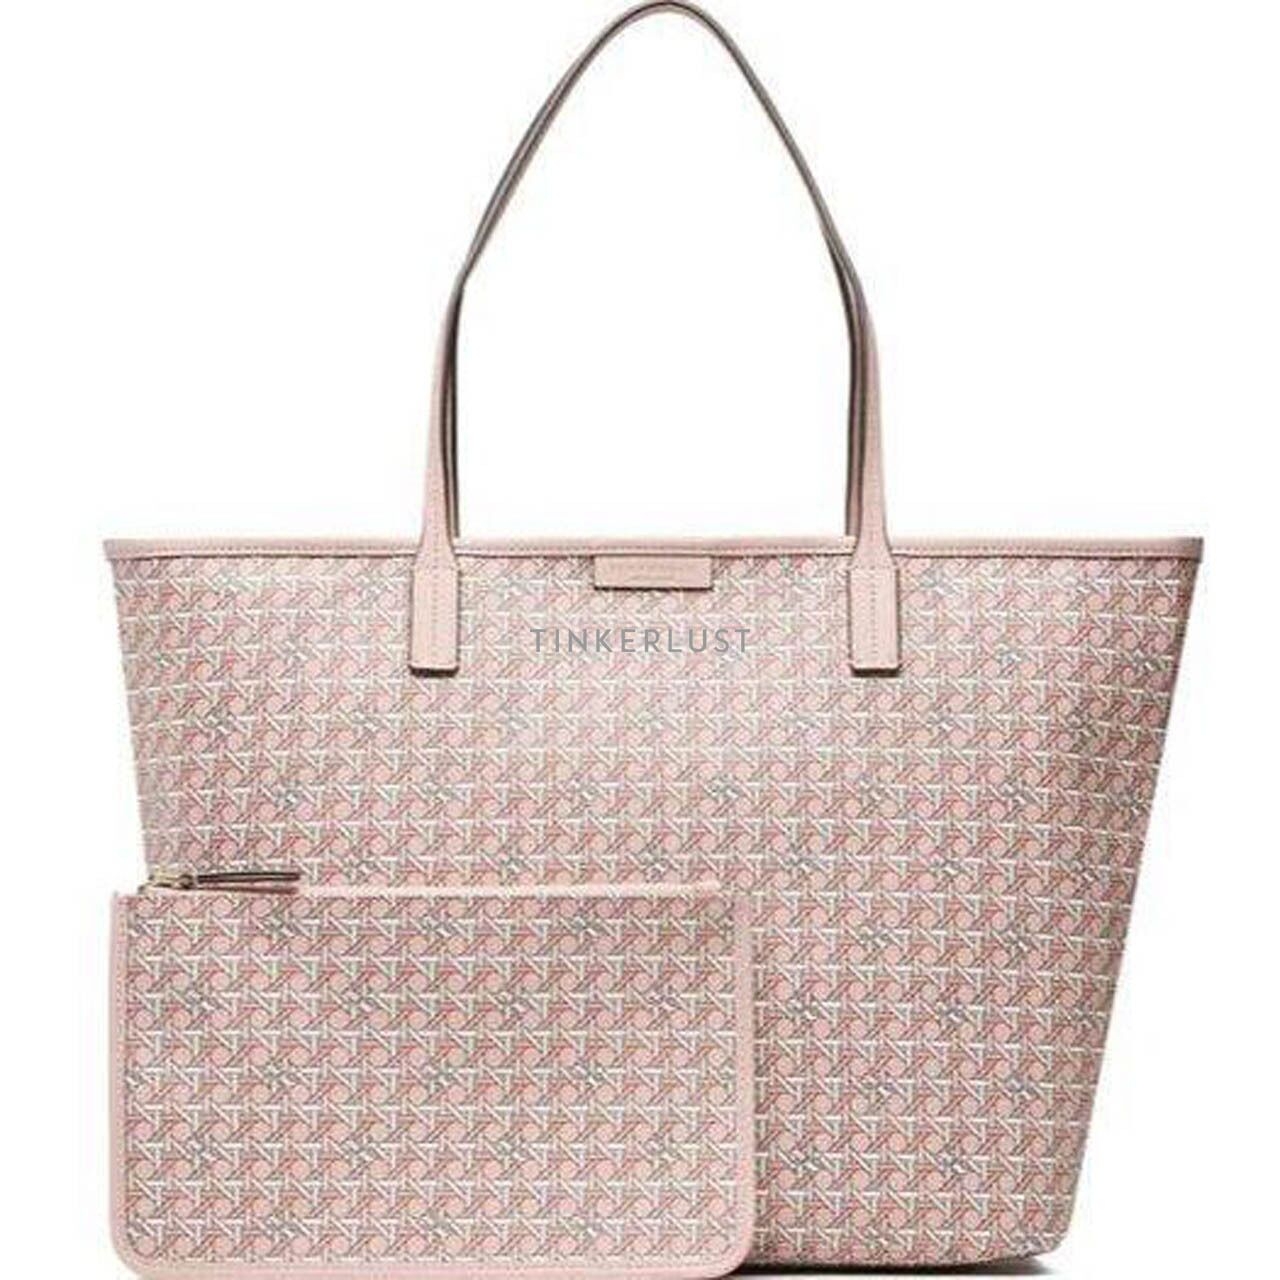 Tory Burch Ever-Ready Zip In Winter Peach Large Tote Bag 